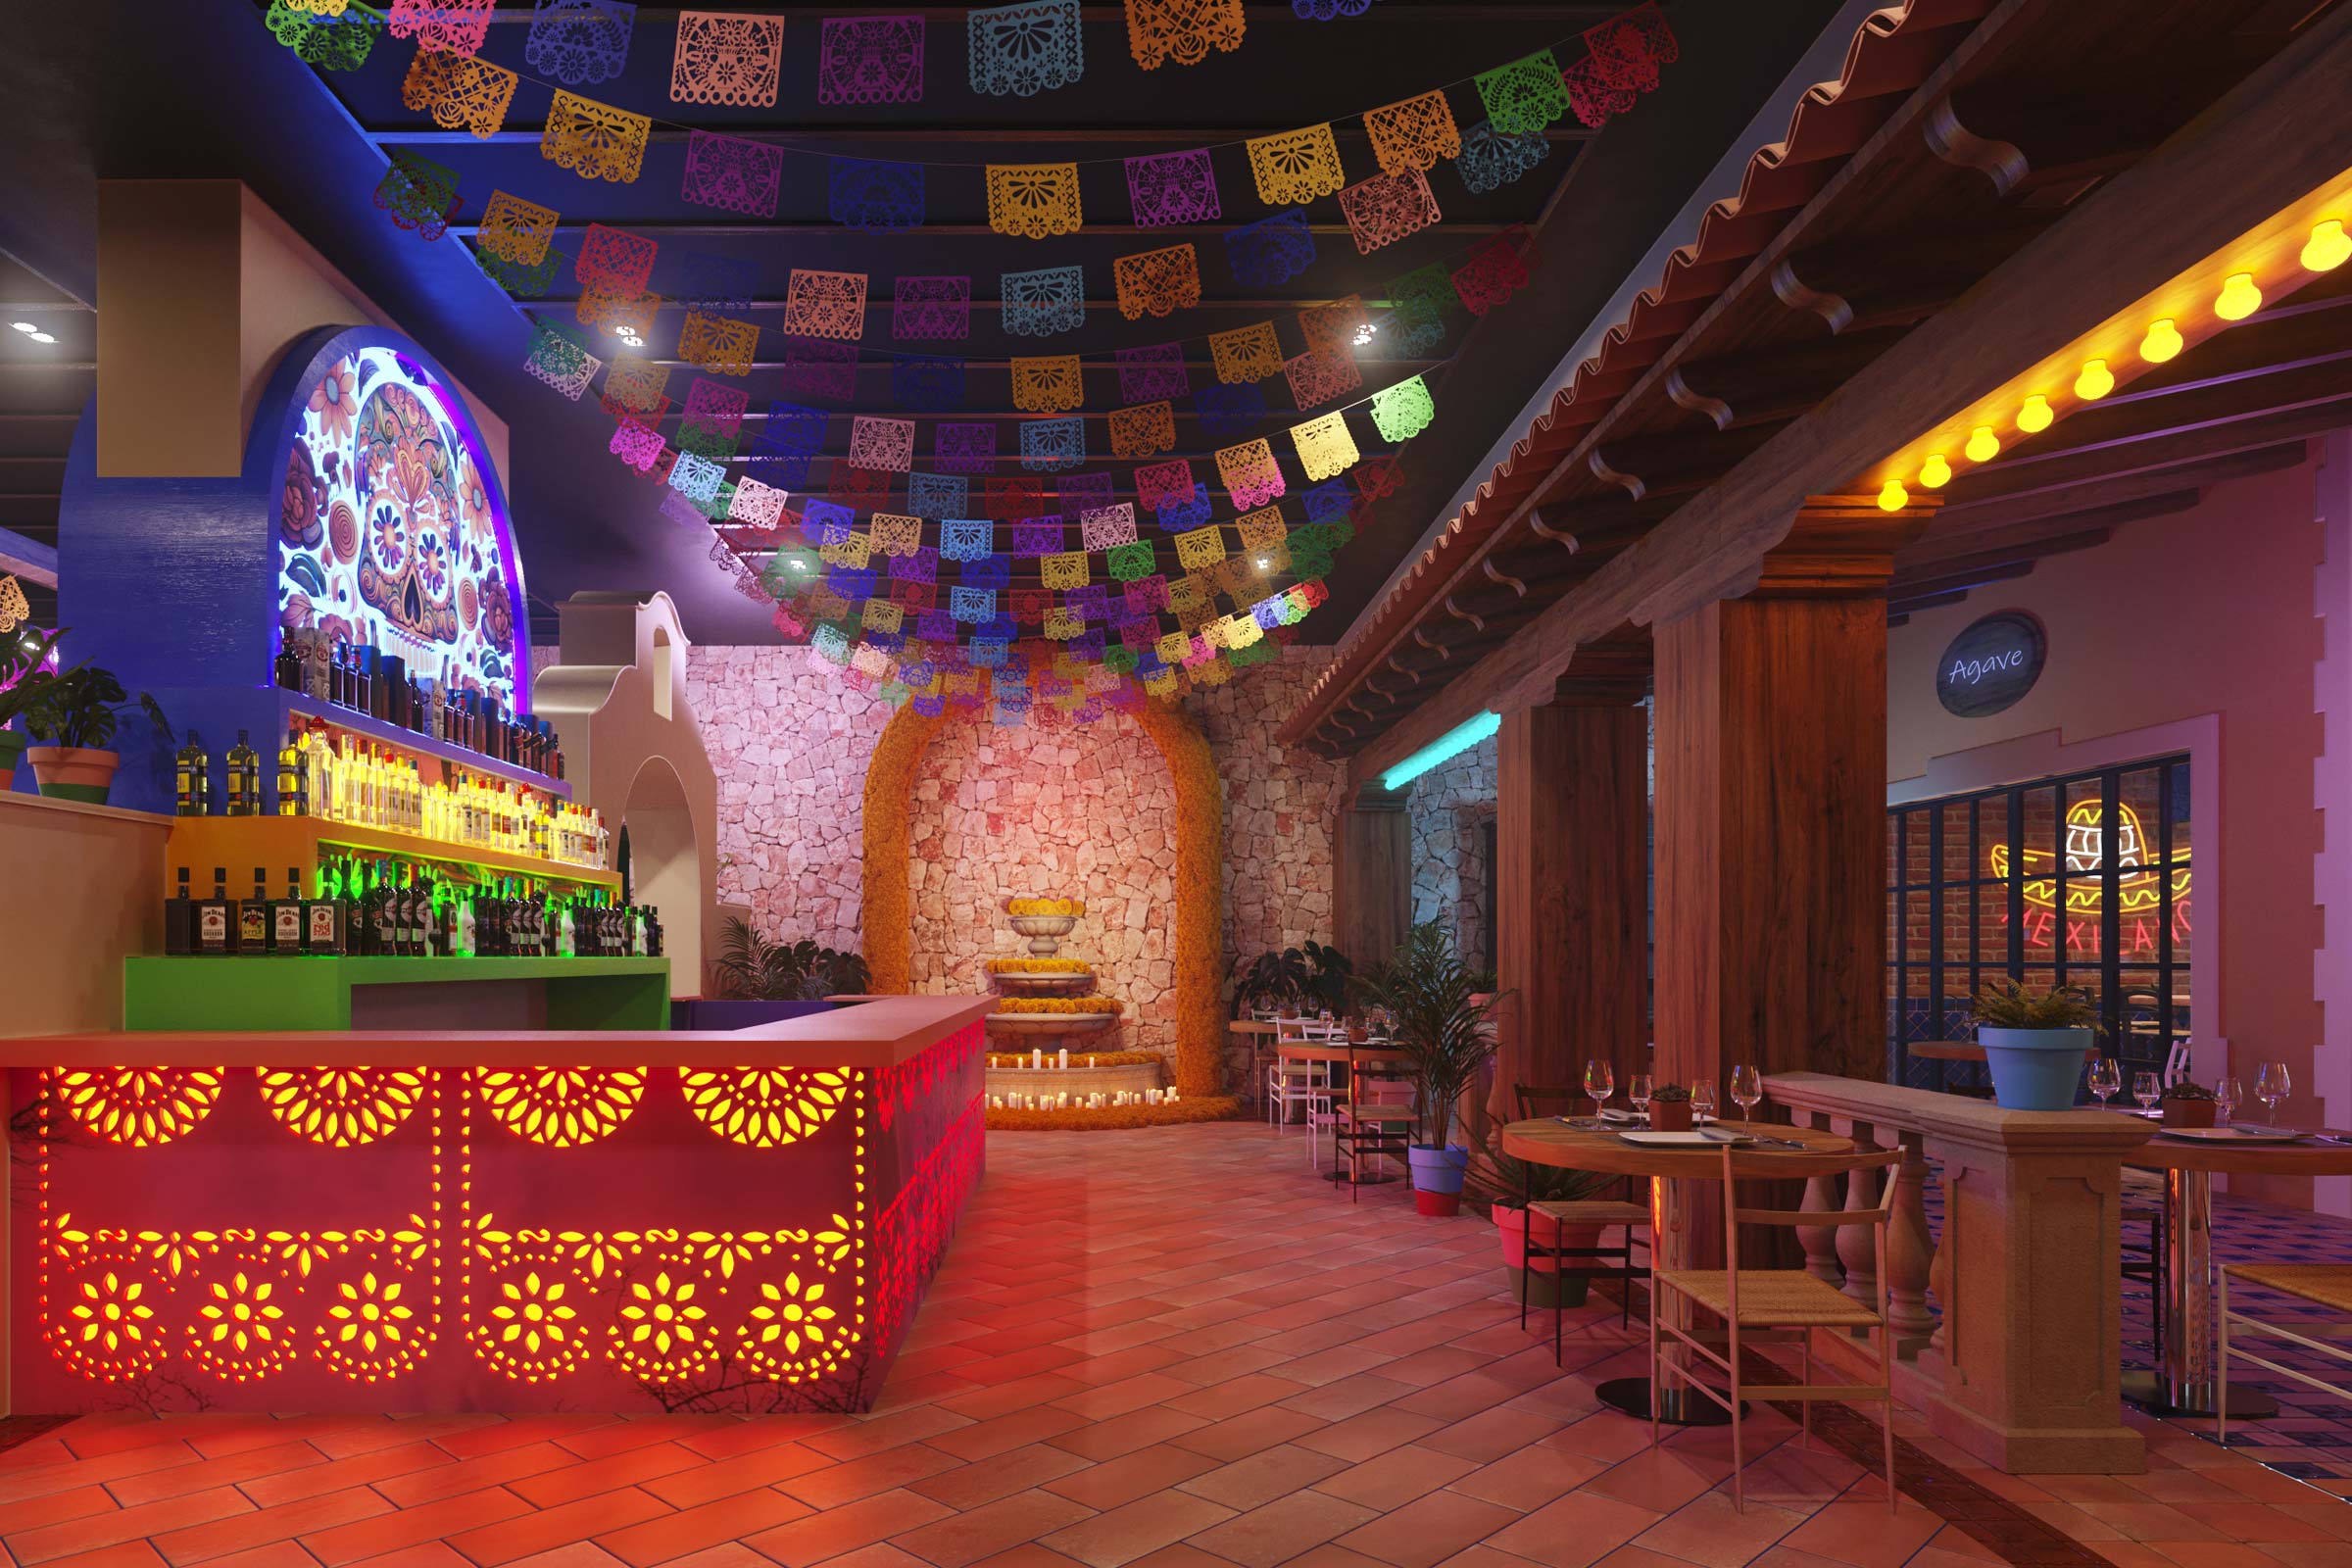 Mexican Cantina style bar in Cancun